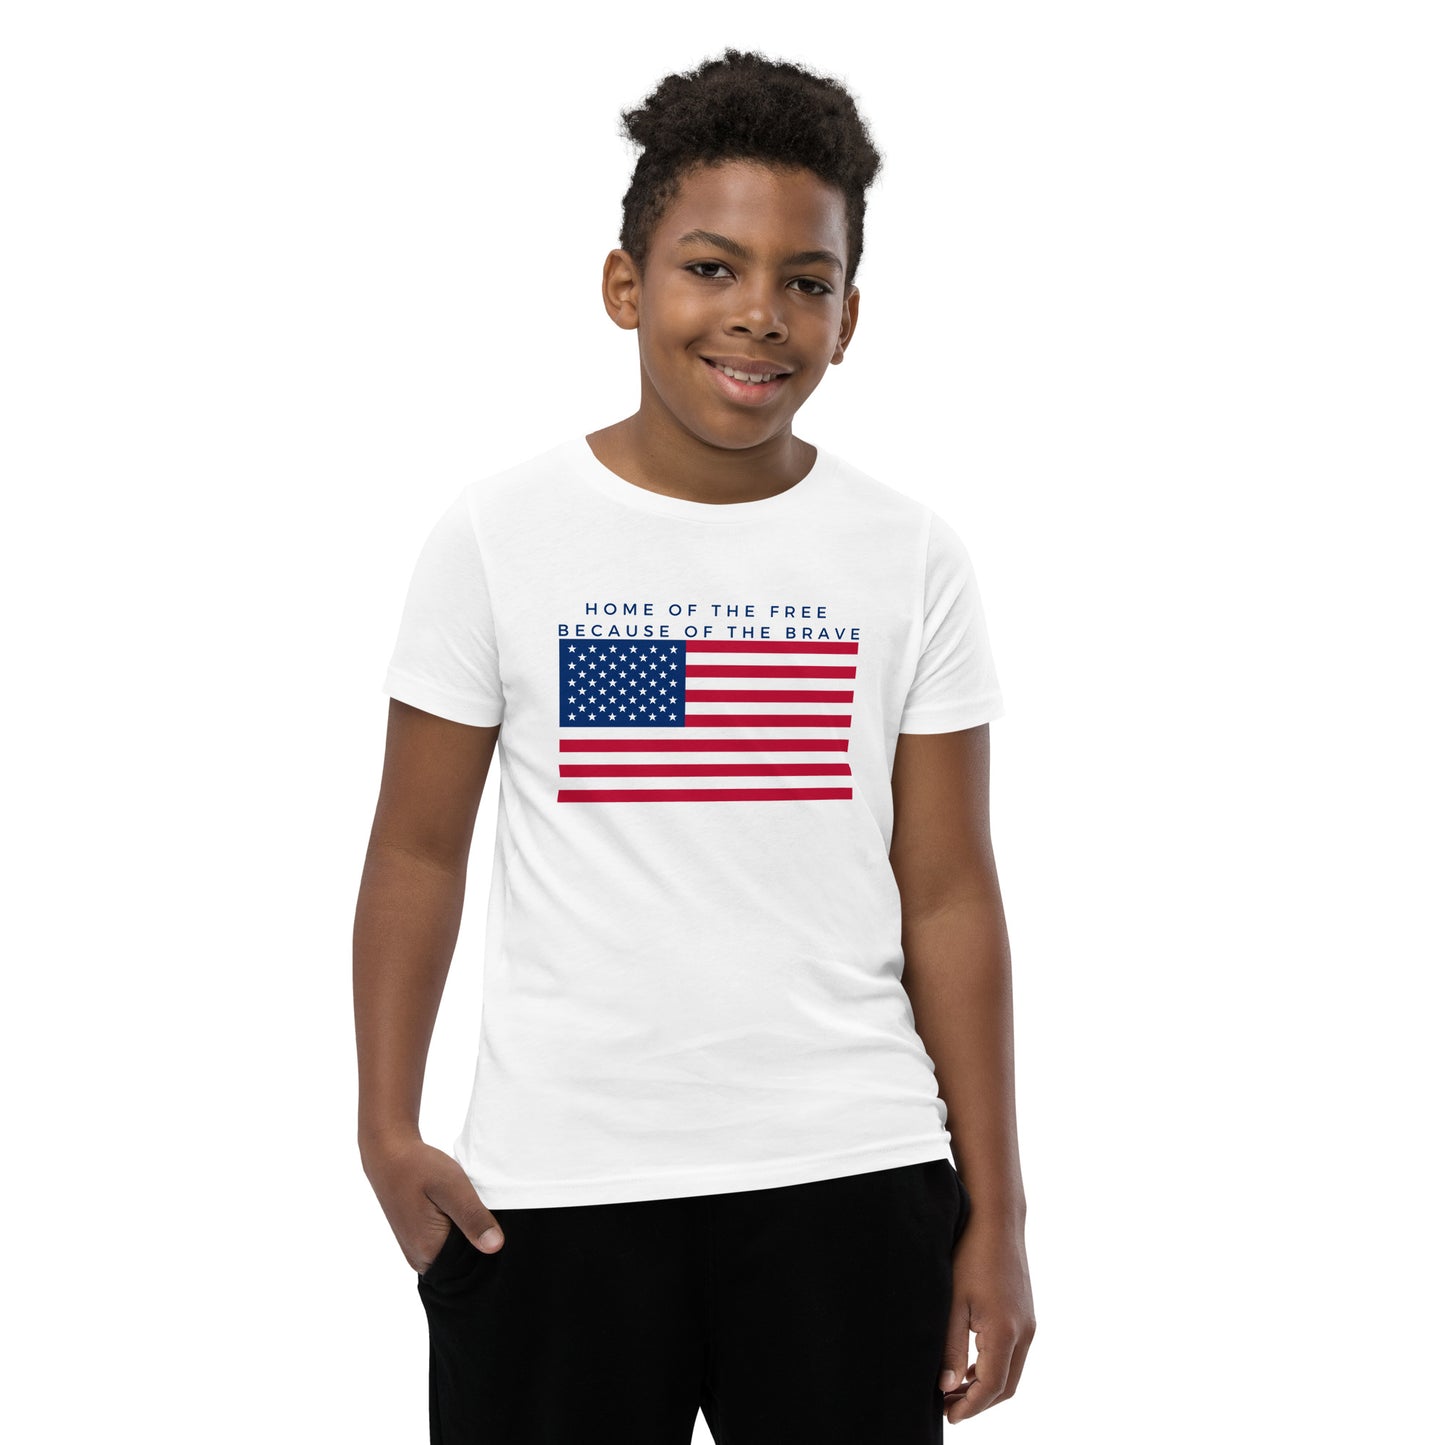 Home of the Free Youth Memorial Day T-shirt